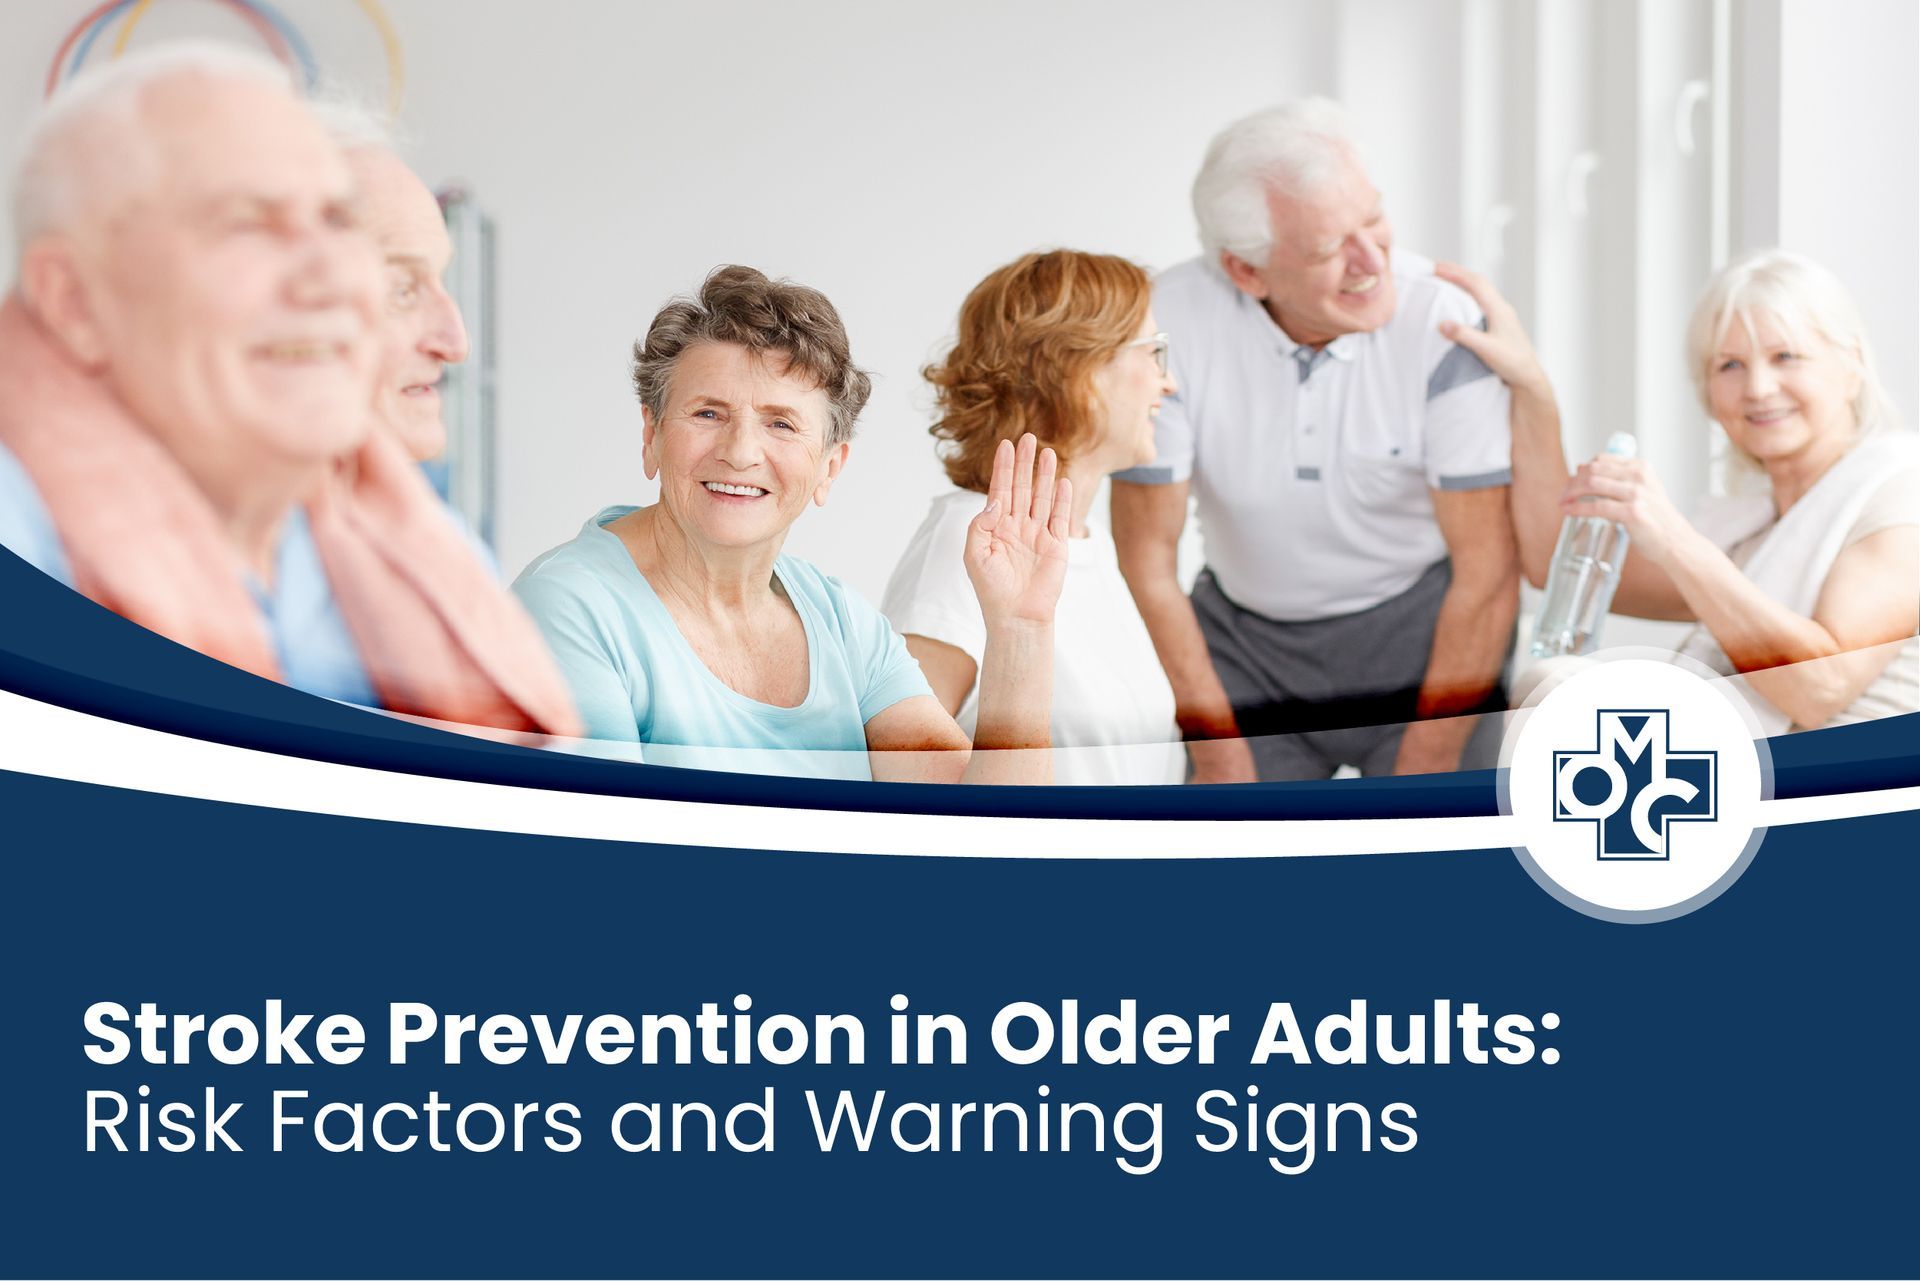 Stroke Prevention in Older Adults: Risk Factors and Warning Signs